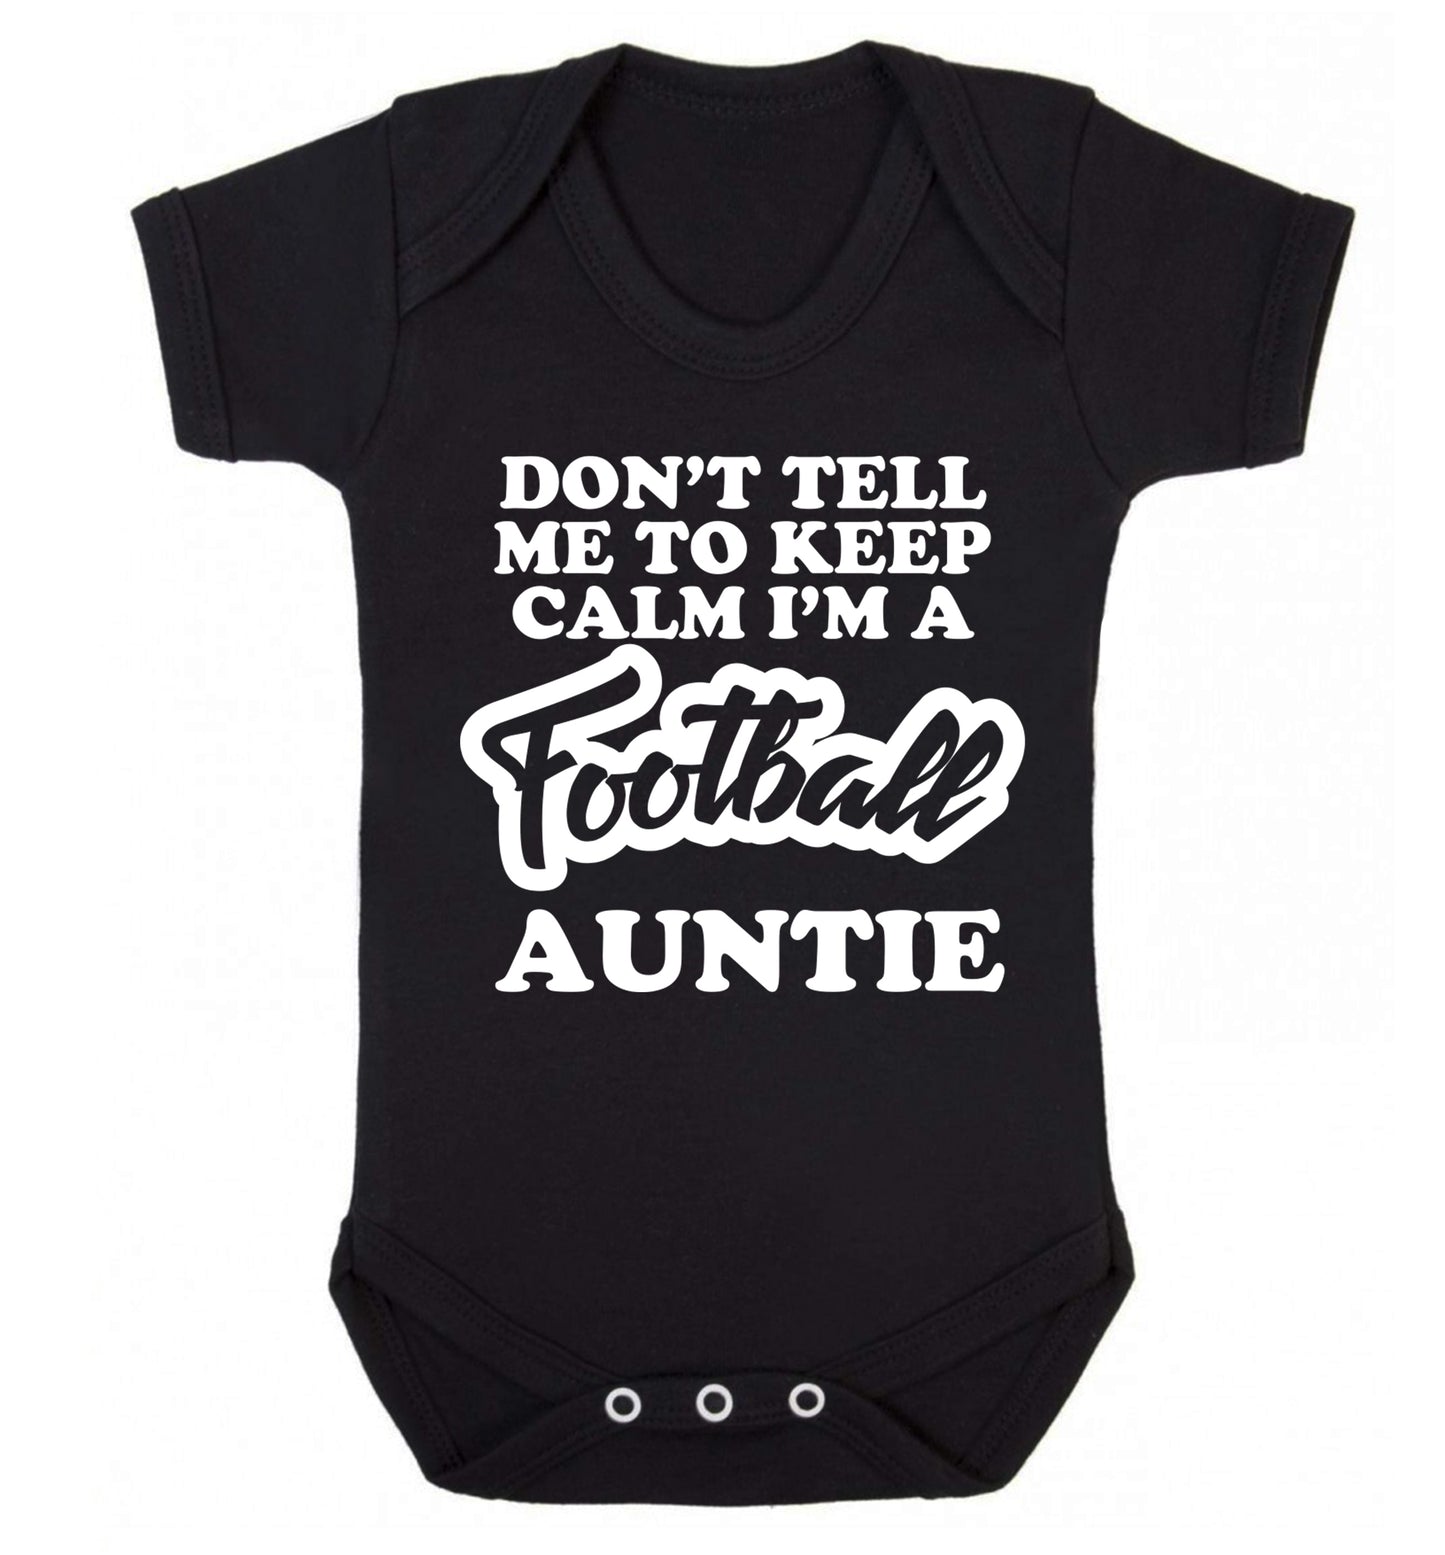 Don't tell me to keep calm I'm a football auntie Baby Vest black 18-24 months